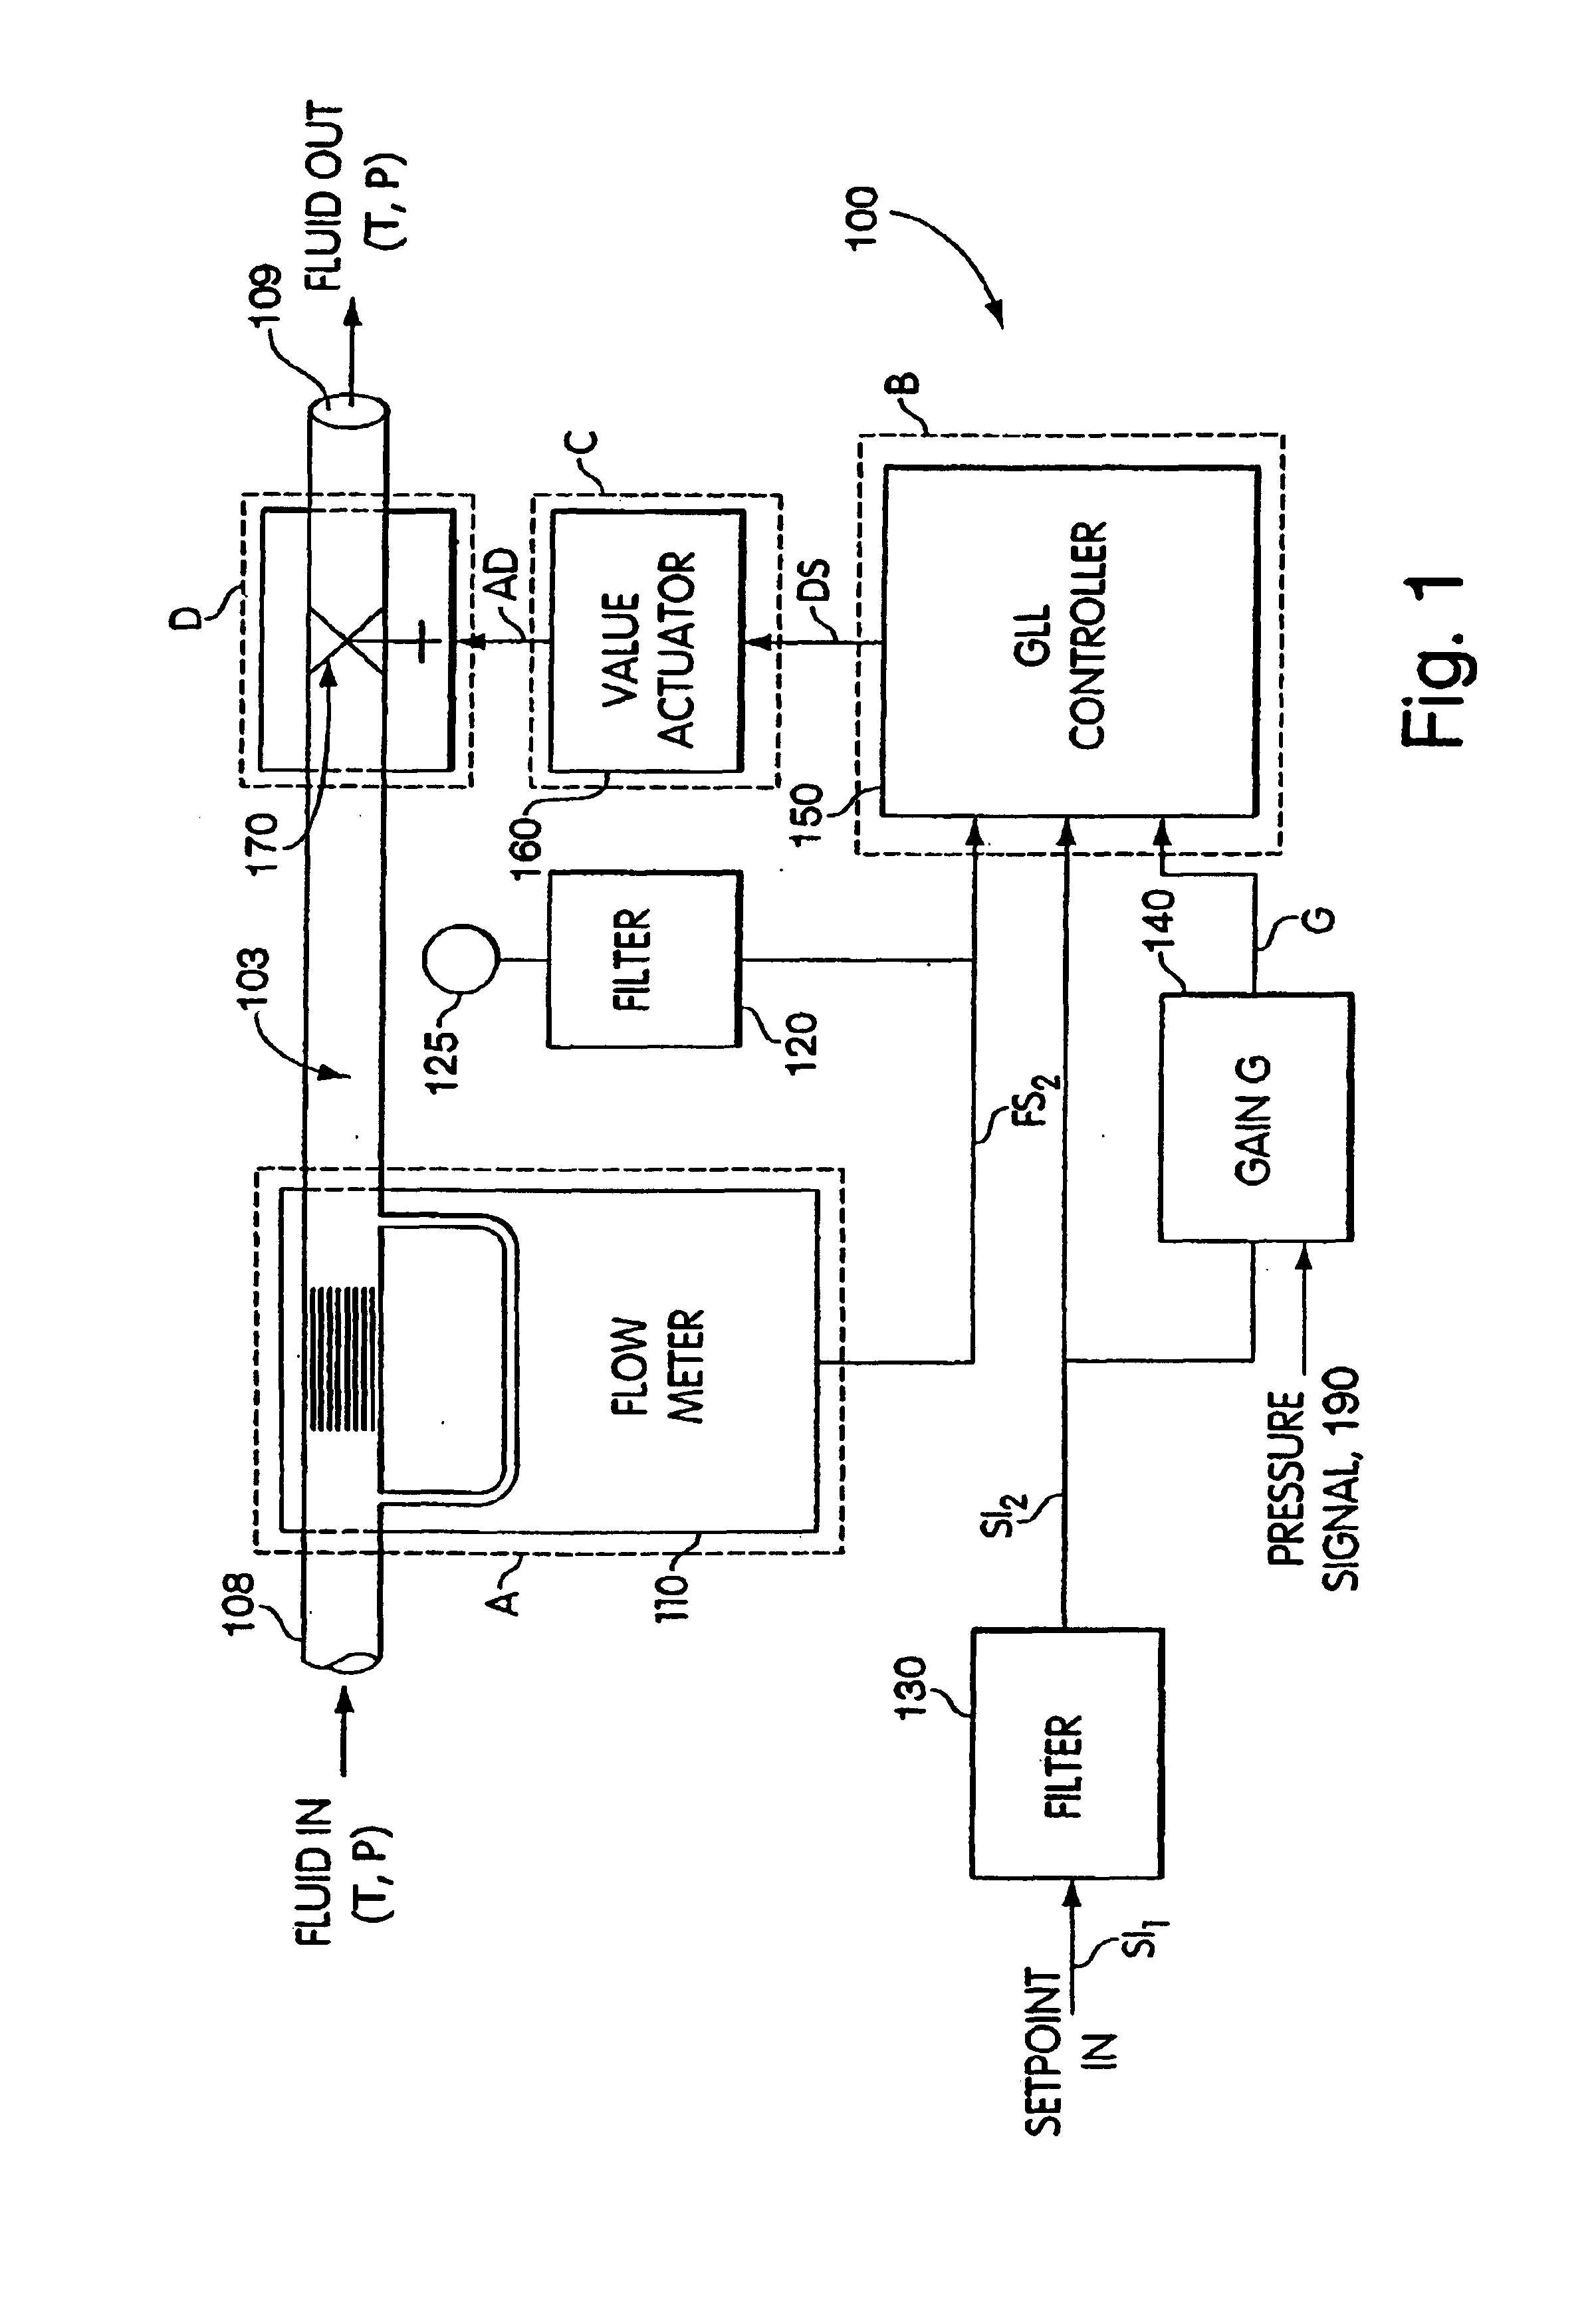 Methods and apparatus for pressure compensation in a mass flow controller